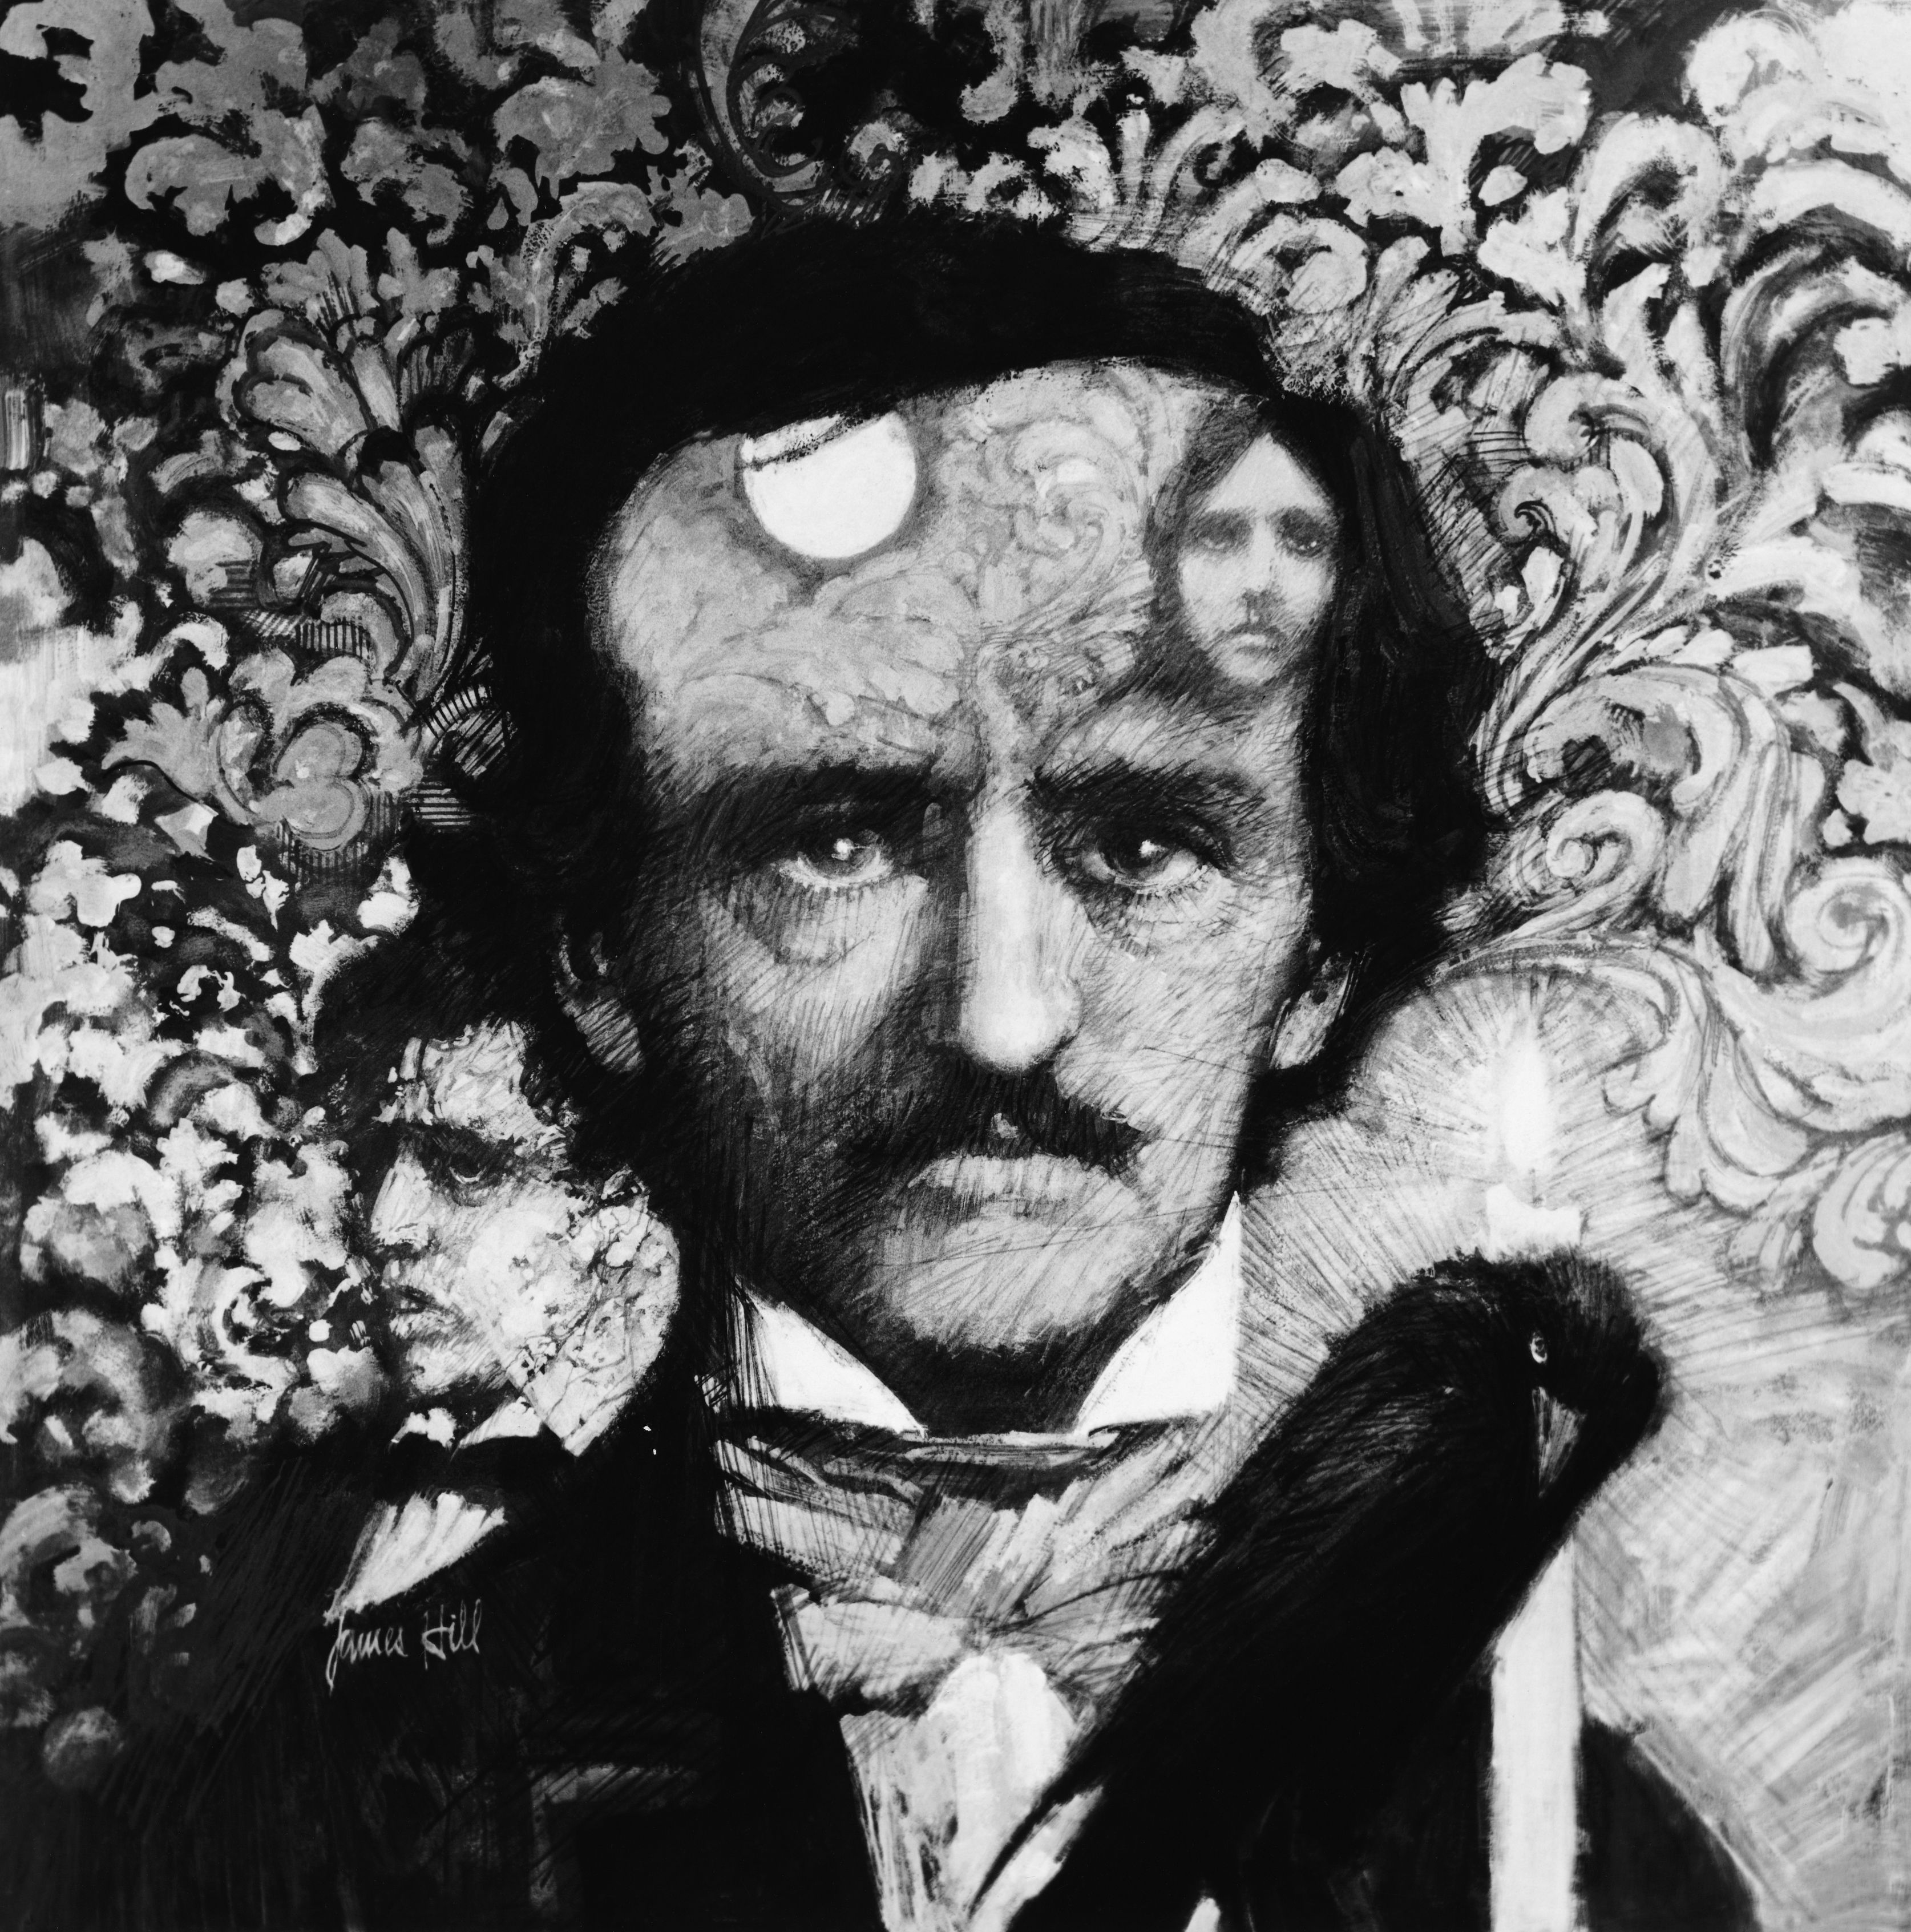 The Riddle of Edgar Allan Poe's Death